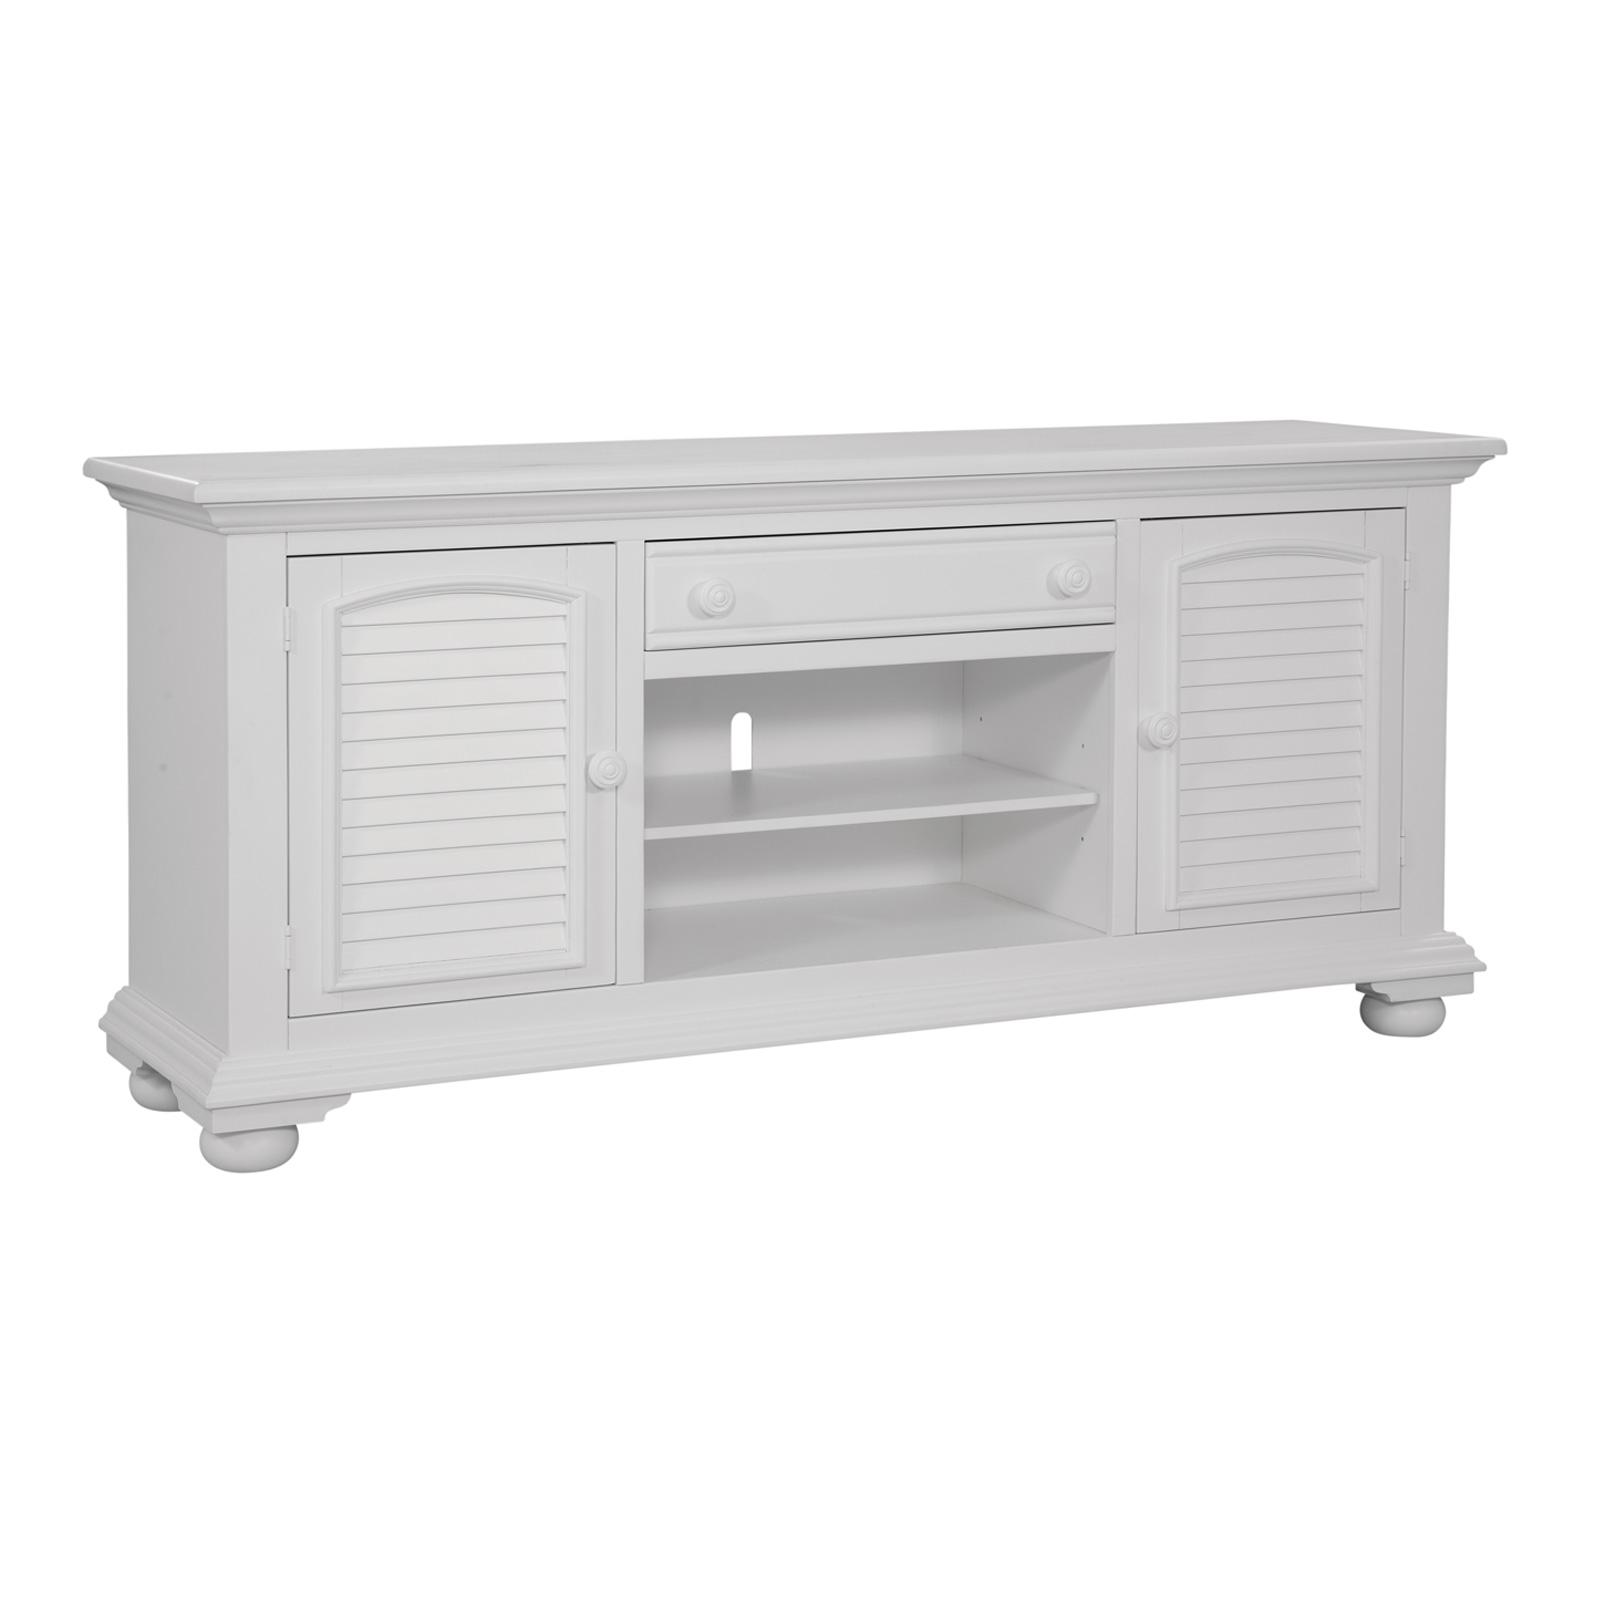 American Woodcrafters COTTAGE 6510-217 Tv Console